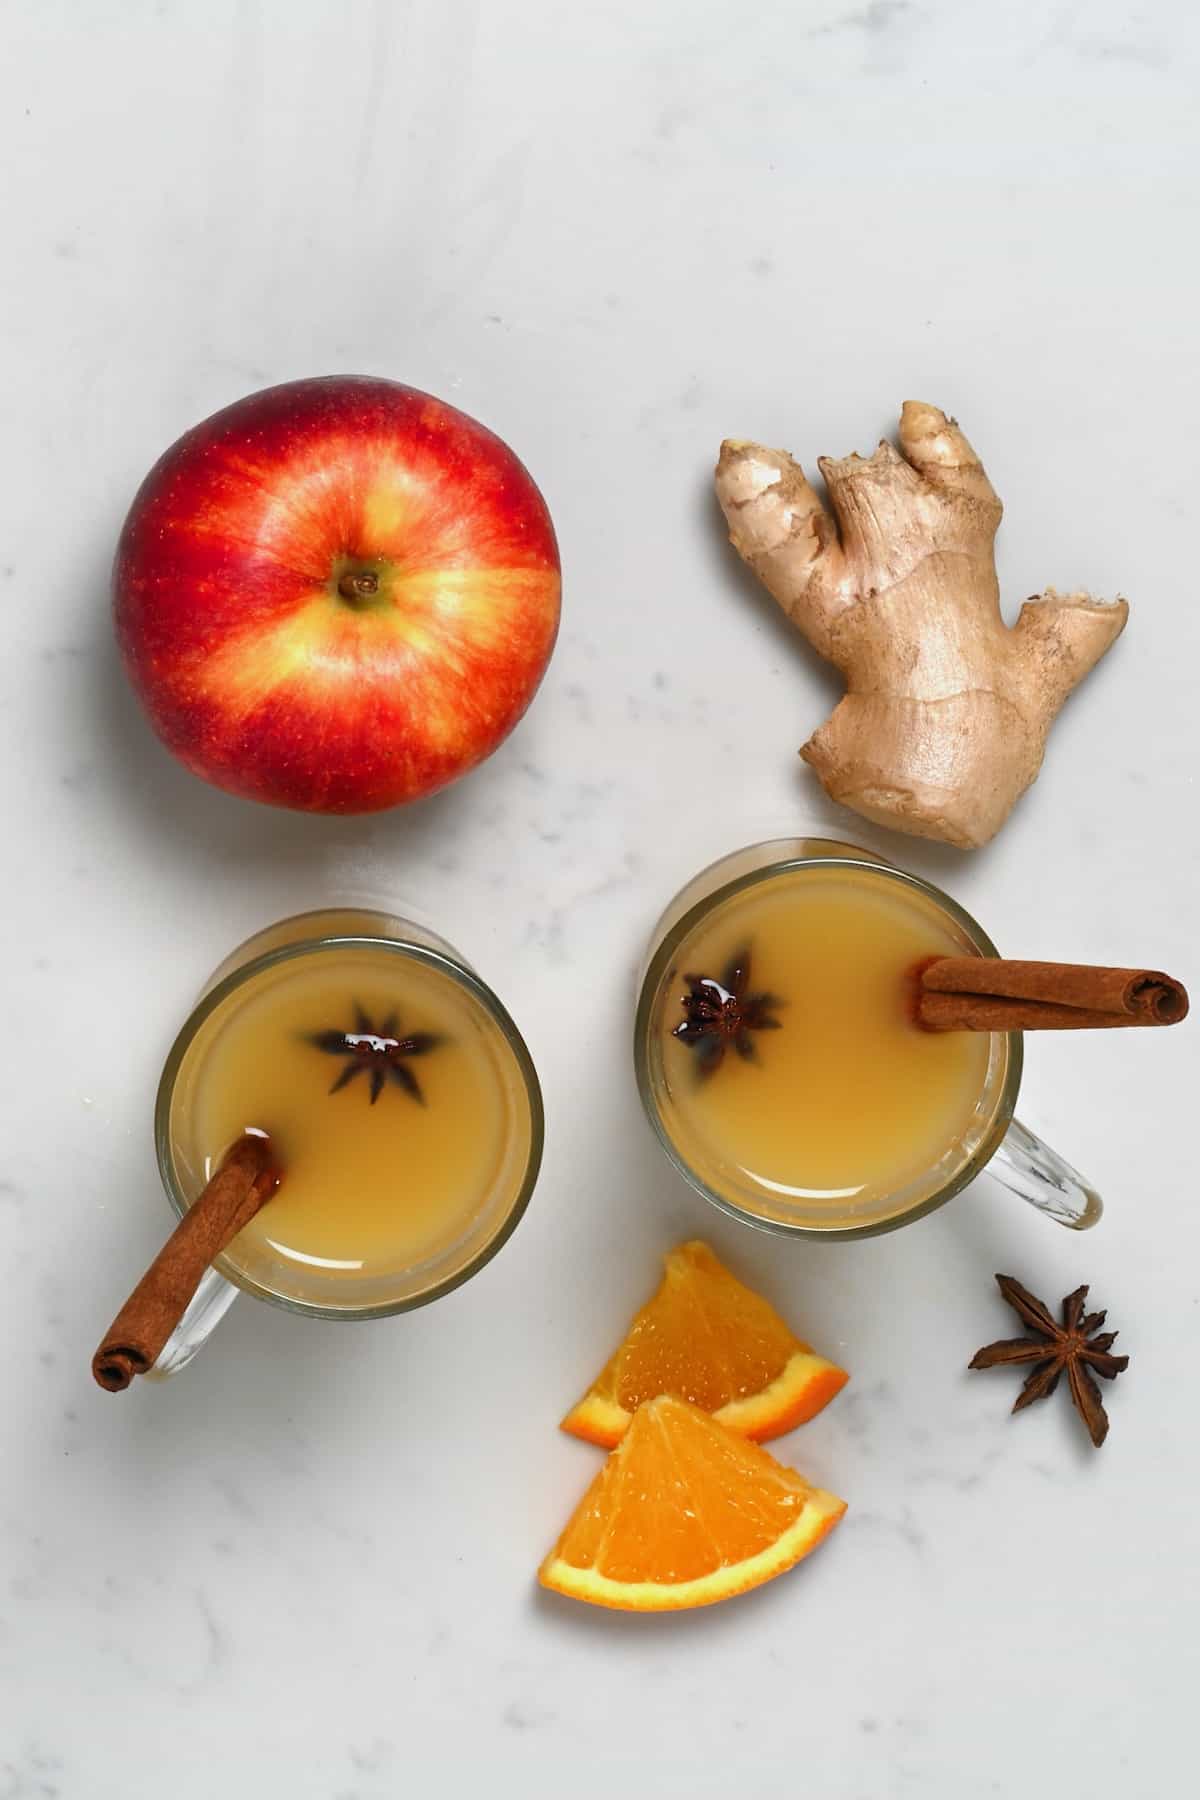 https://www.alphafoodie.com/wp-content/uploads/2021/11/Spice-Apple-Cider-Two-glasses-with-spiced-apple-cider.jpeg